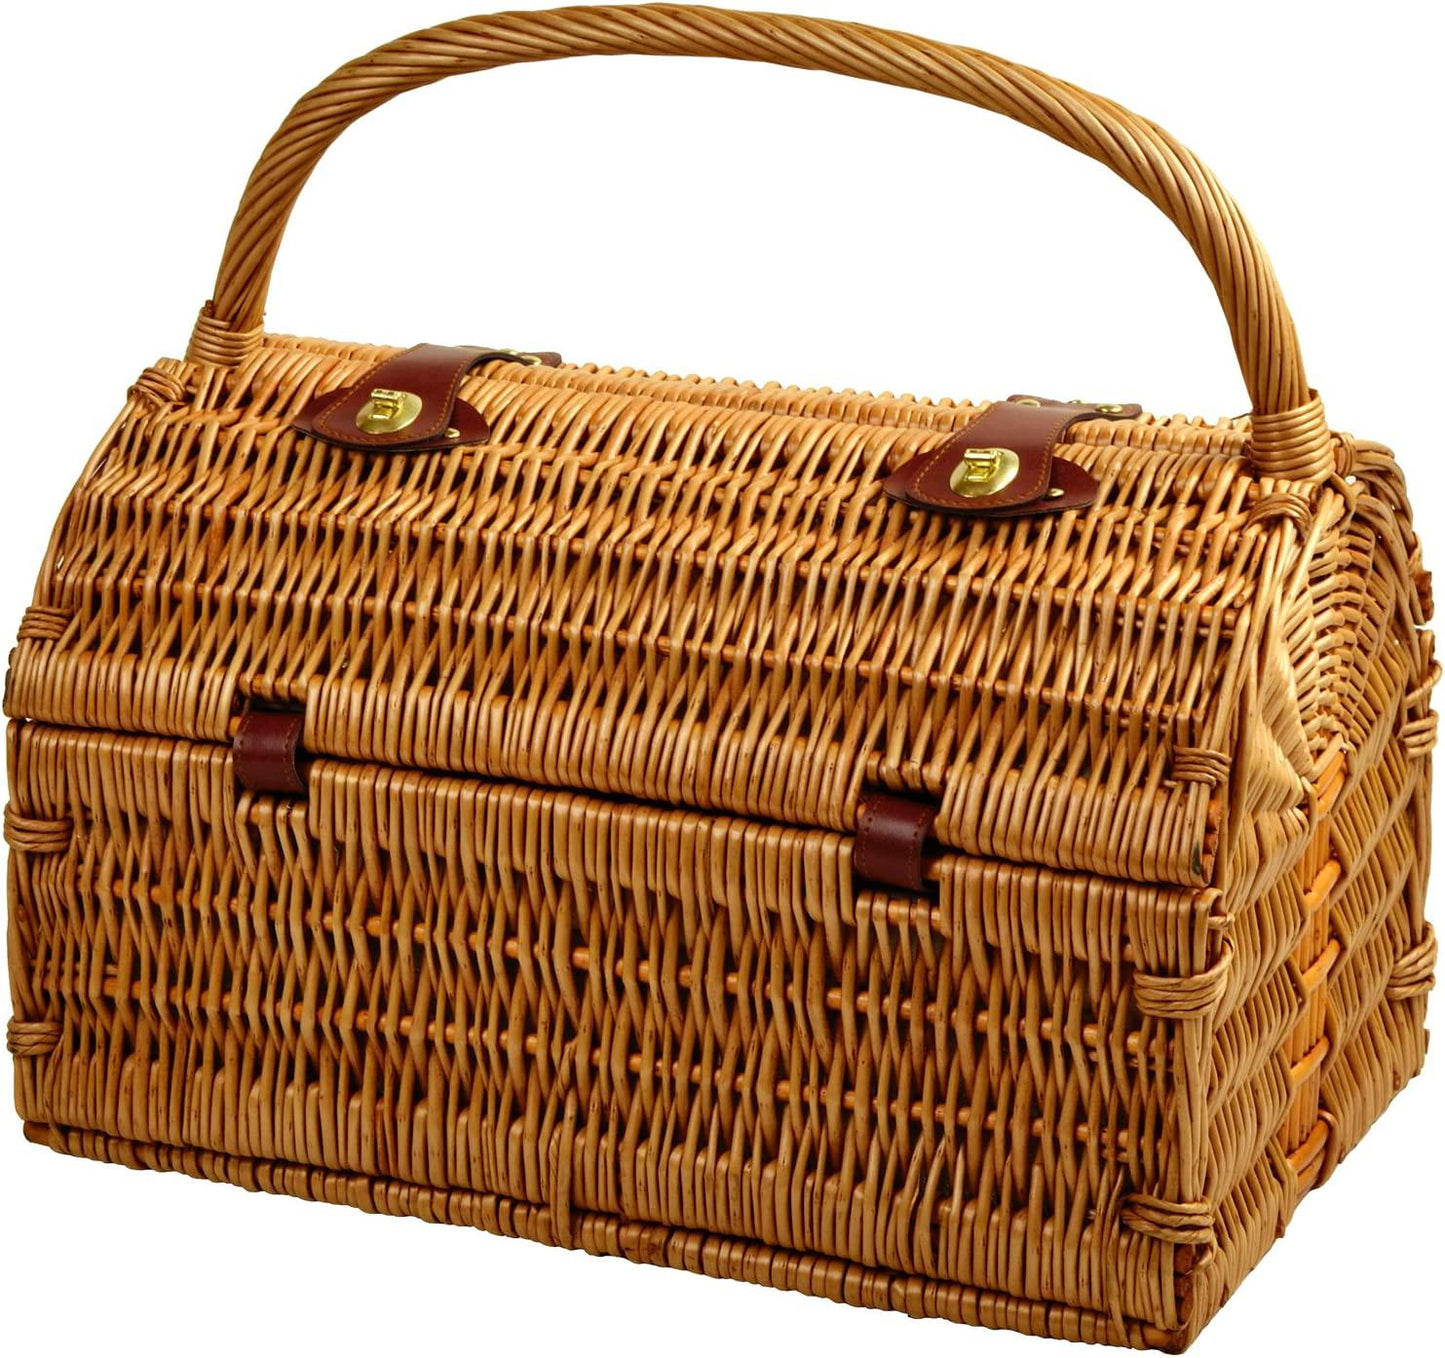 Picnic at Ascot Huntsman English-Style Willow Picnic Basket with Service for 2 and Blanket- Designed, Assembled and Quality Approved in the USA